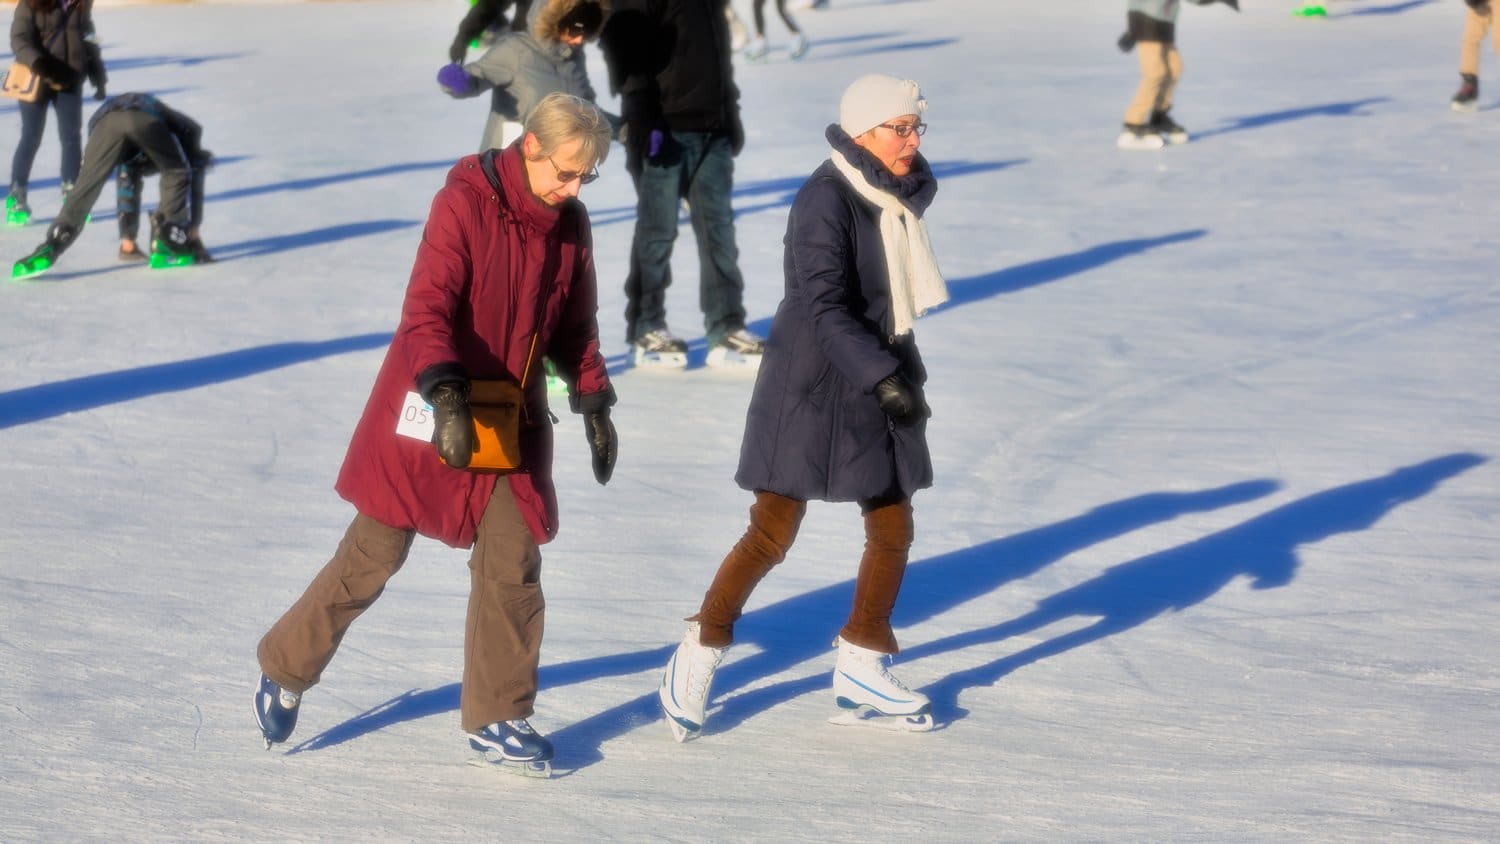 People ice skating outdoors.